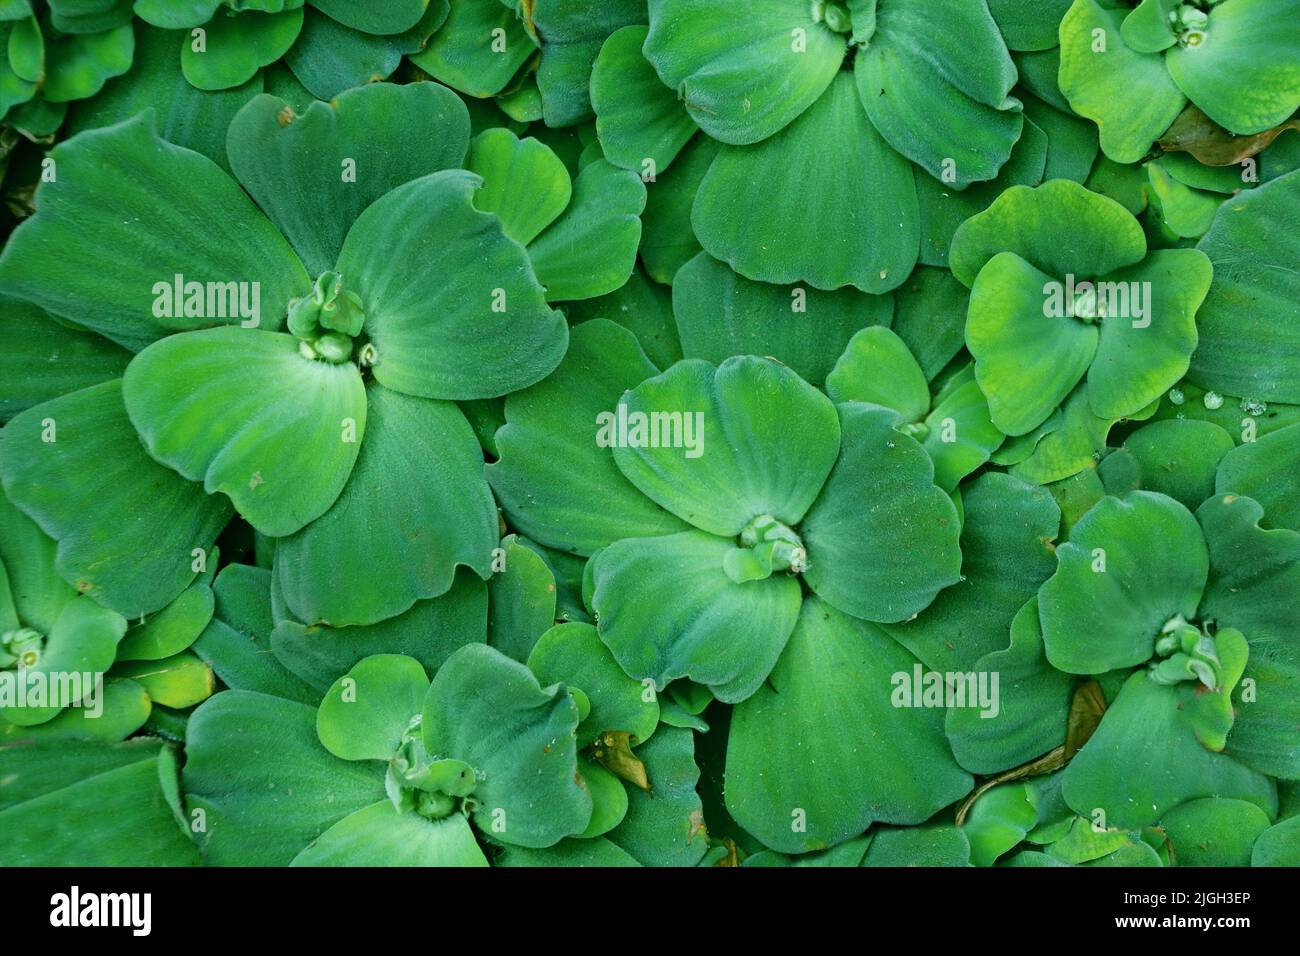 Leaves of Pistia stratiotes (water cabbage, water lettuce). Full background with tropical green free-floating aquatic plant Stock Photo